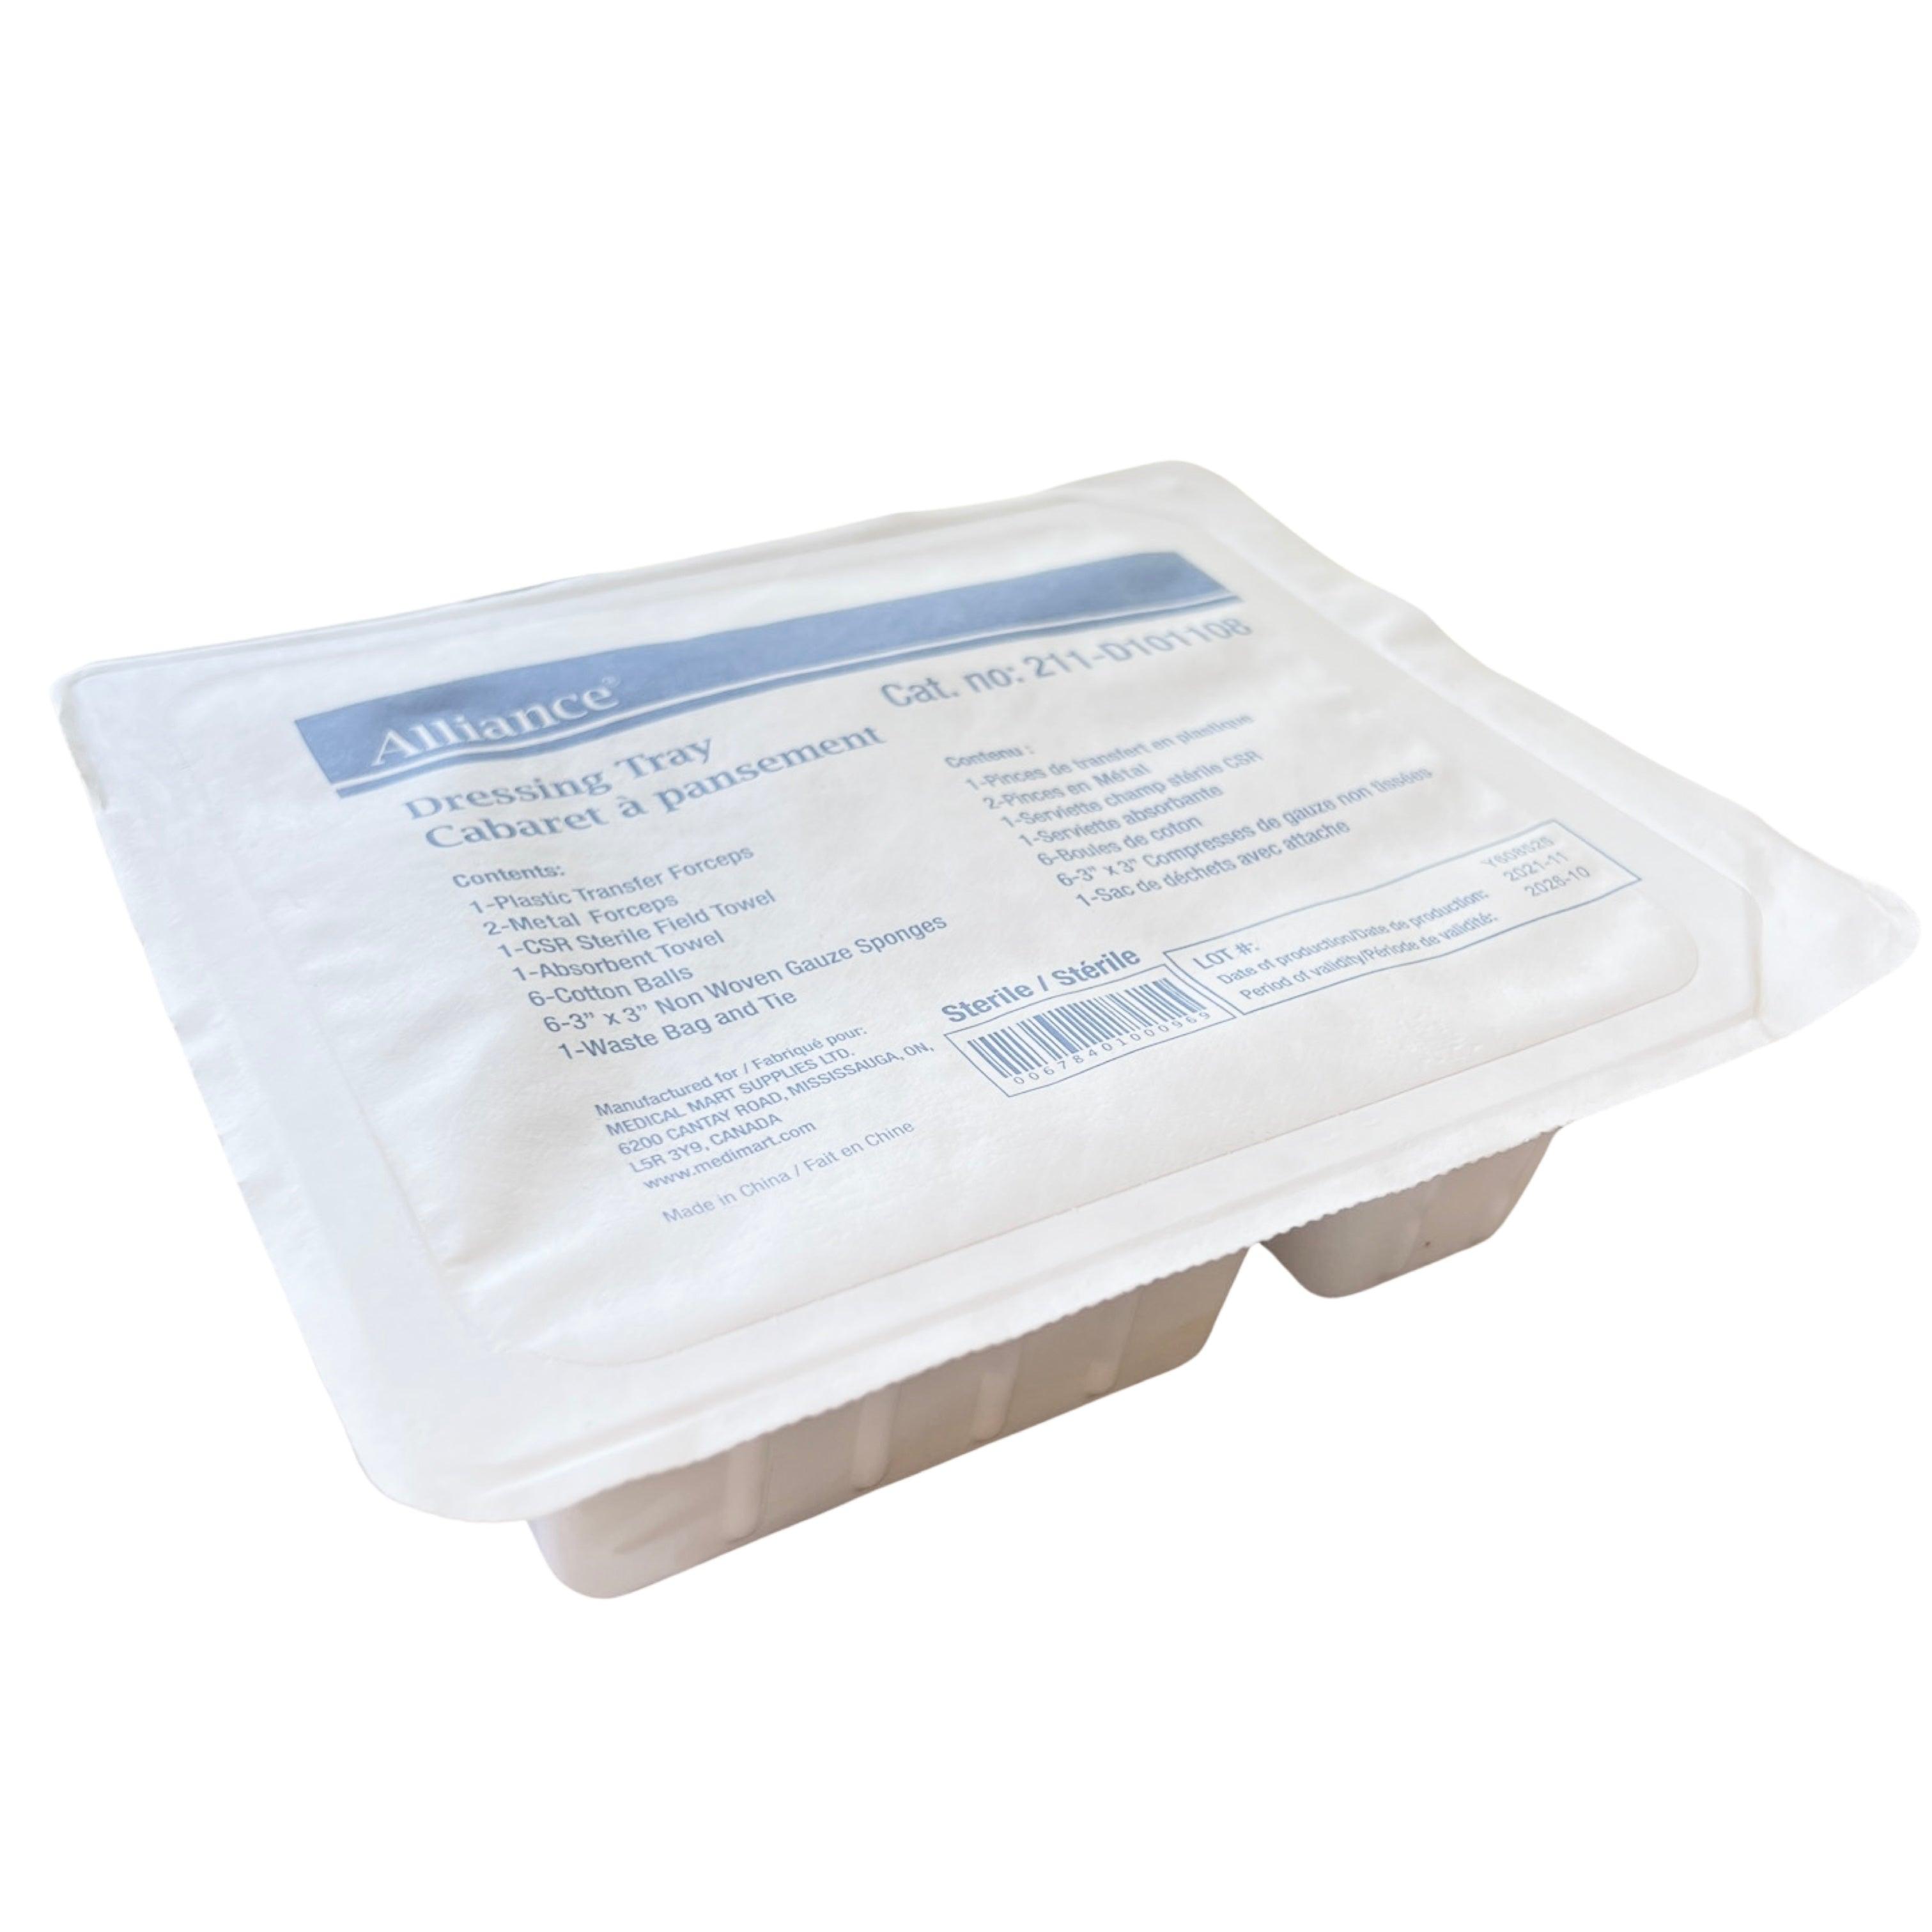 3 Compartment Dressing Tray with Forceps